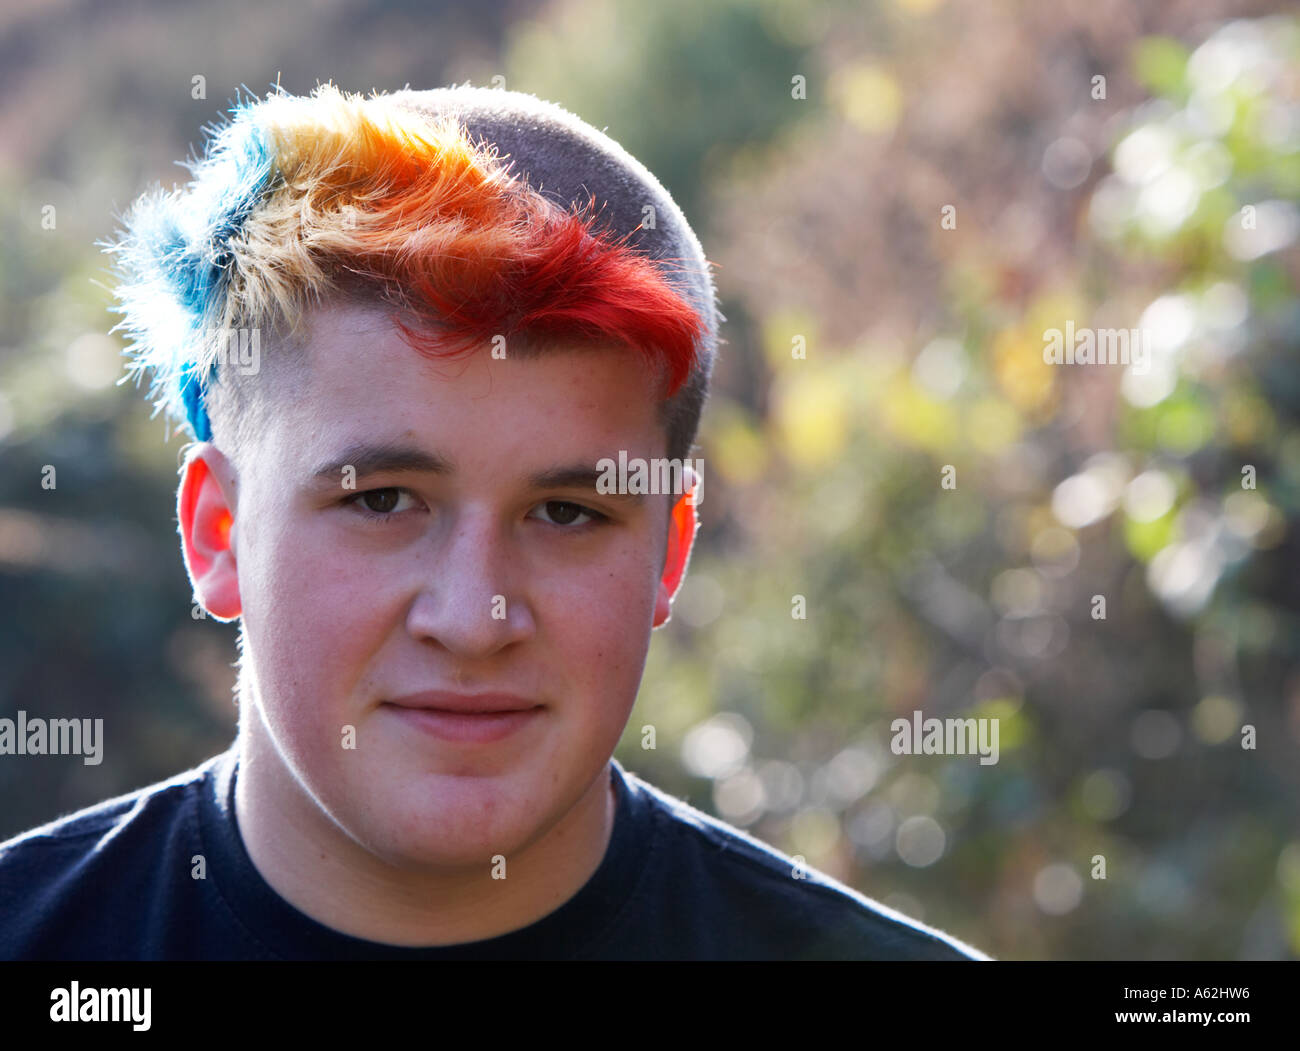 young man with colourful punk hairstyle Stock Photo